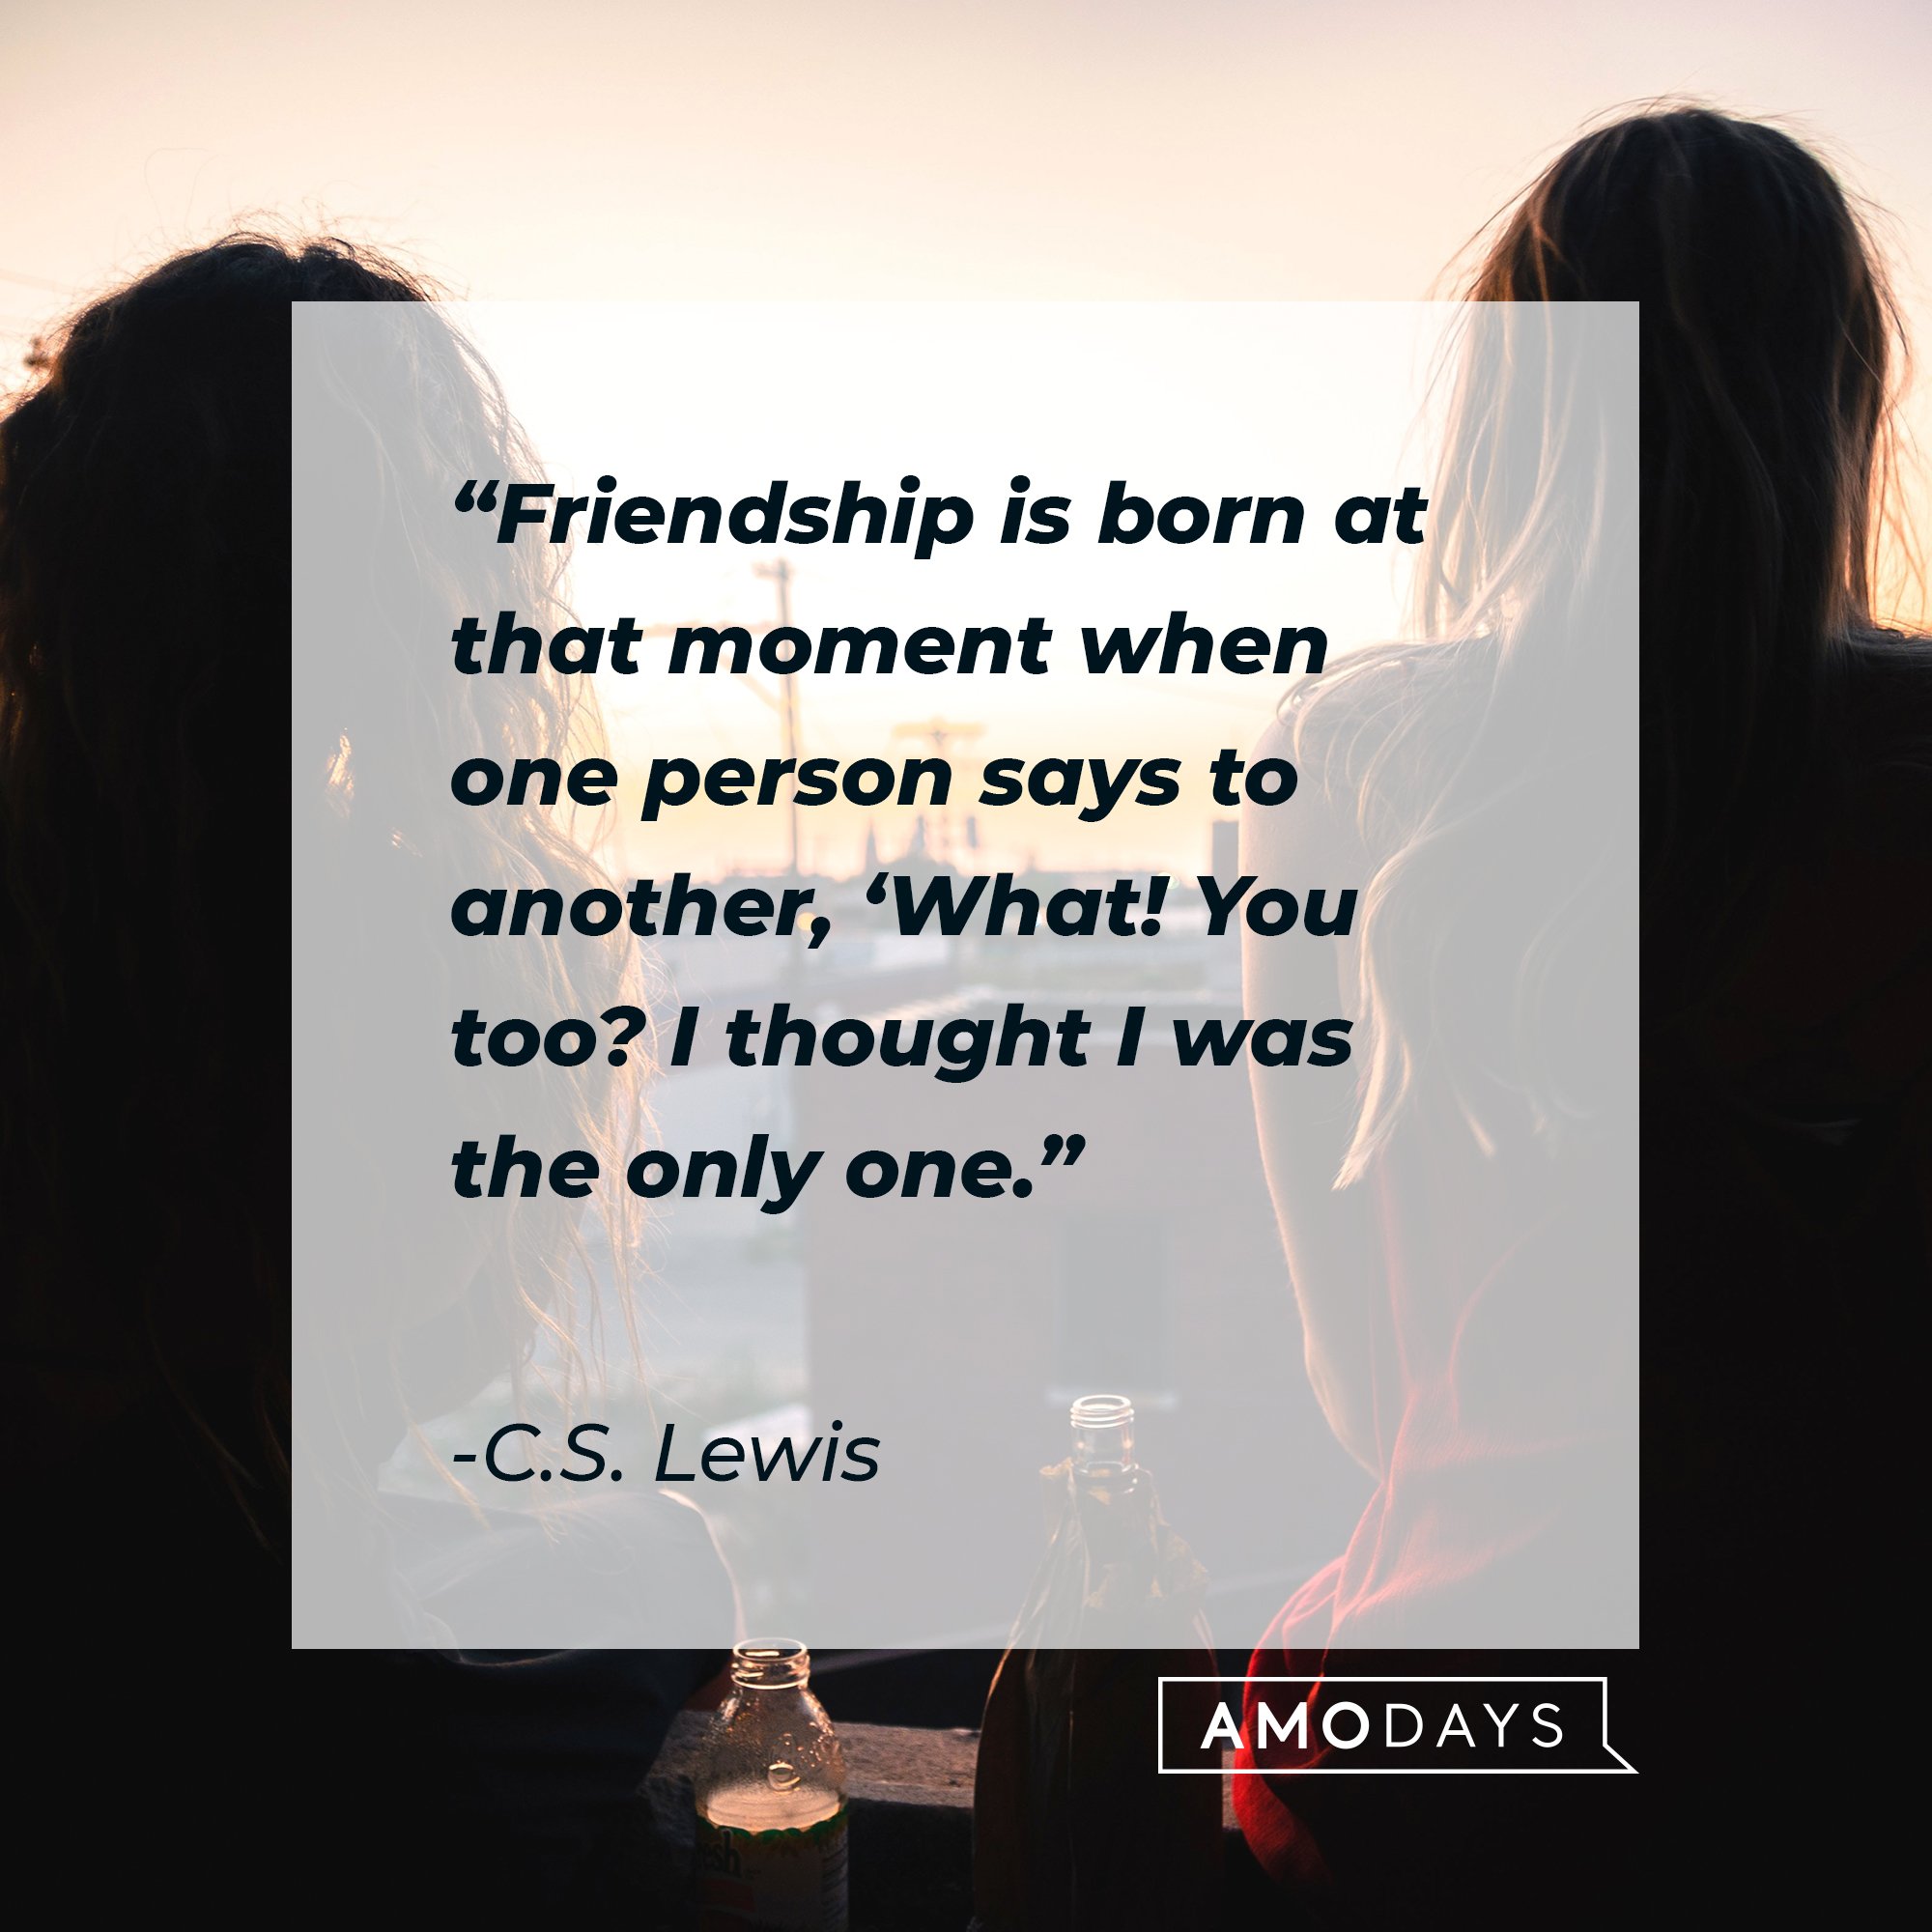 C.S. Lewis’ quotes: “Friendship is born at that moment when one person says to another, ‘What! You too? I thought I was the only one.” | Image: AmoDays